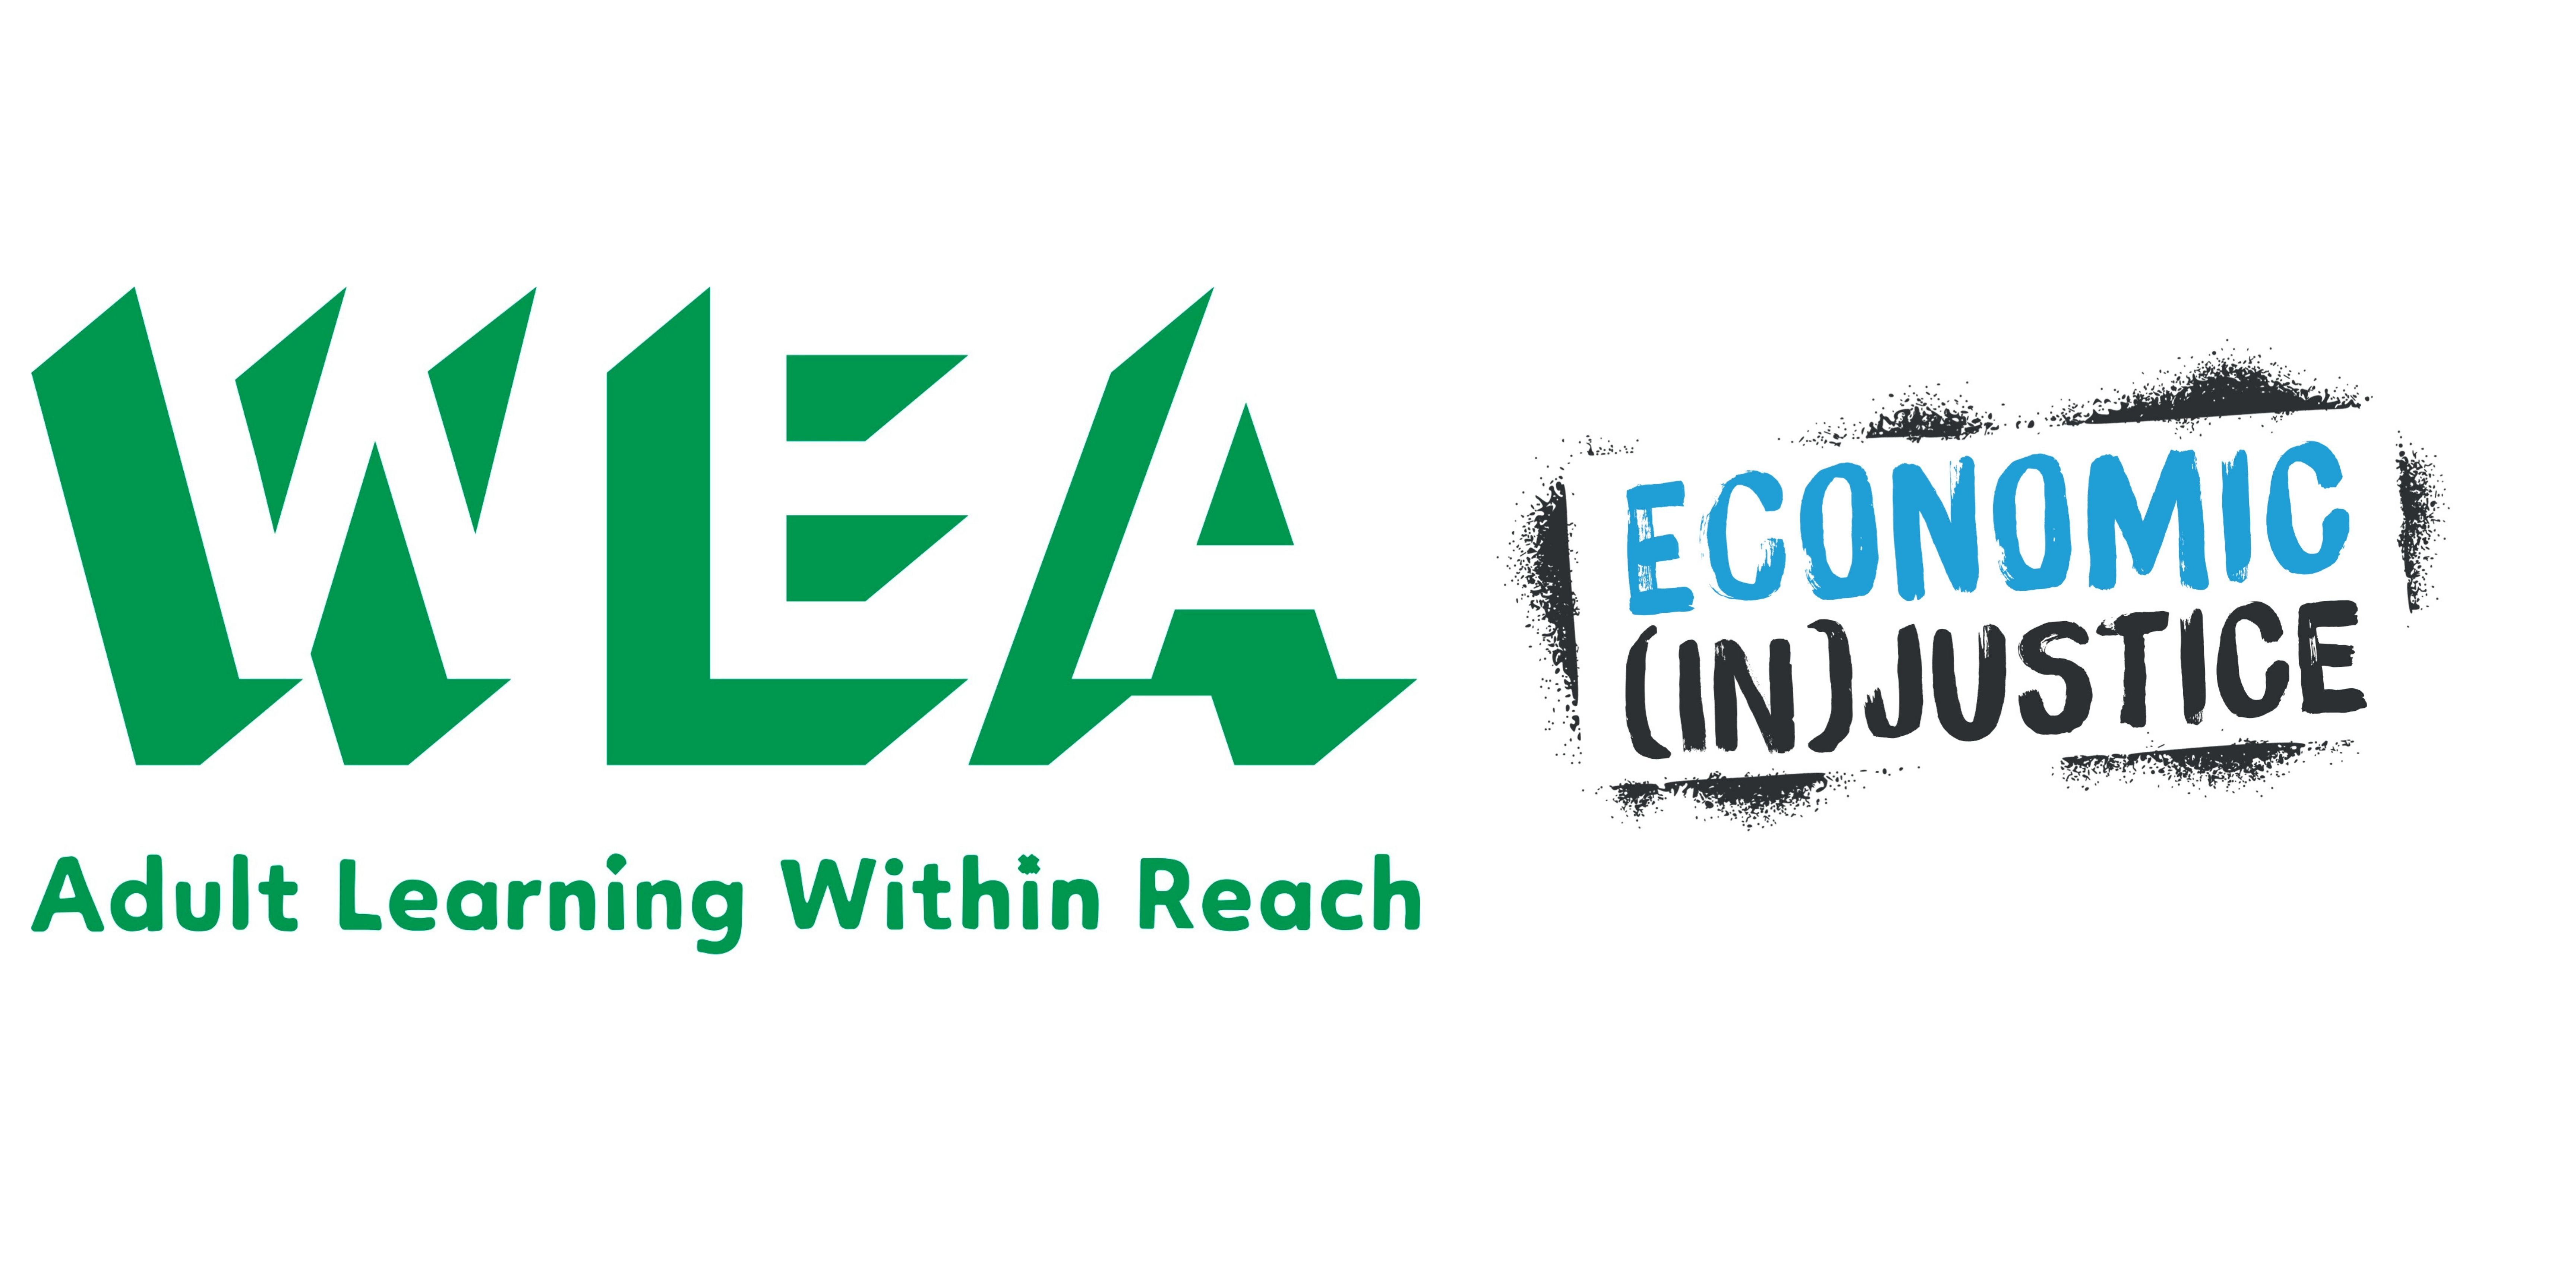 Workers Education Association and Economic Injustice logo.